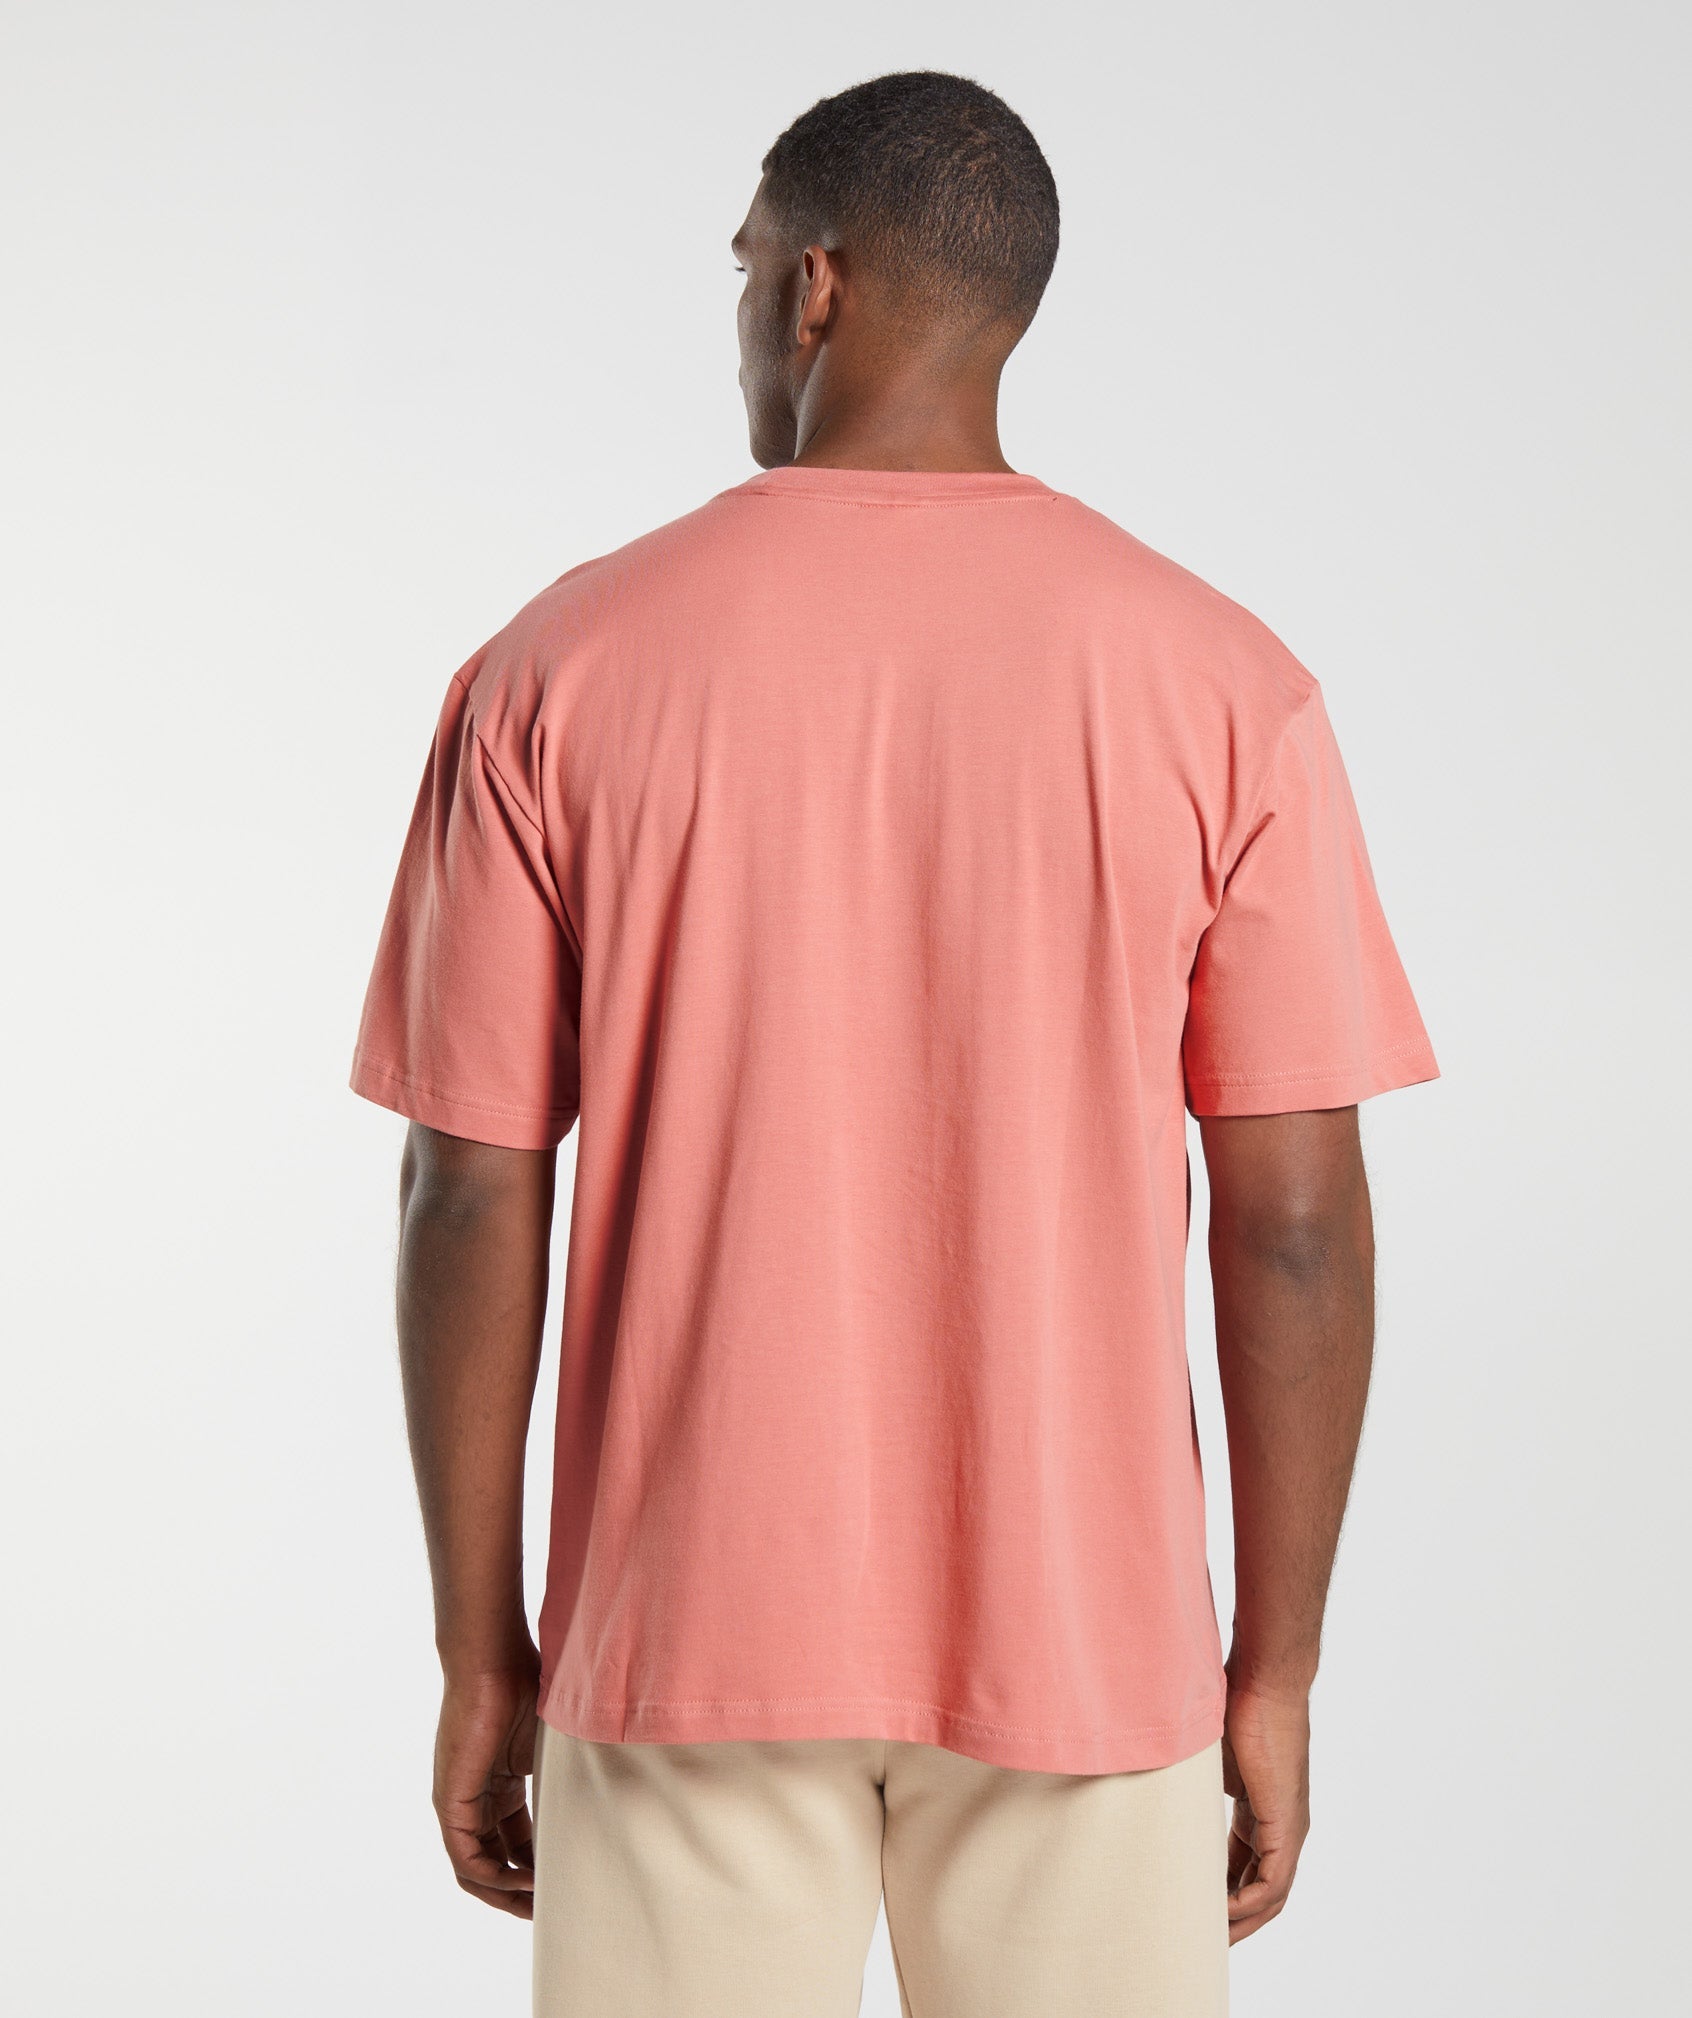 Essential Oversized T-Shirt in Terracotta Pink